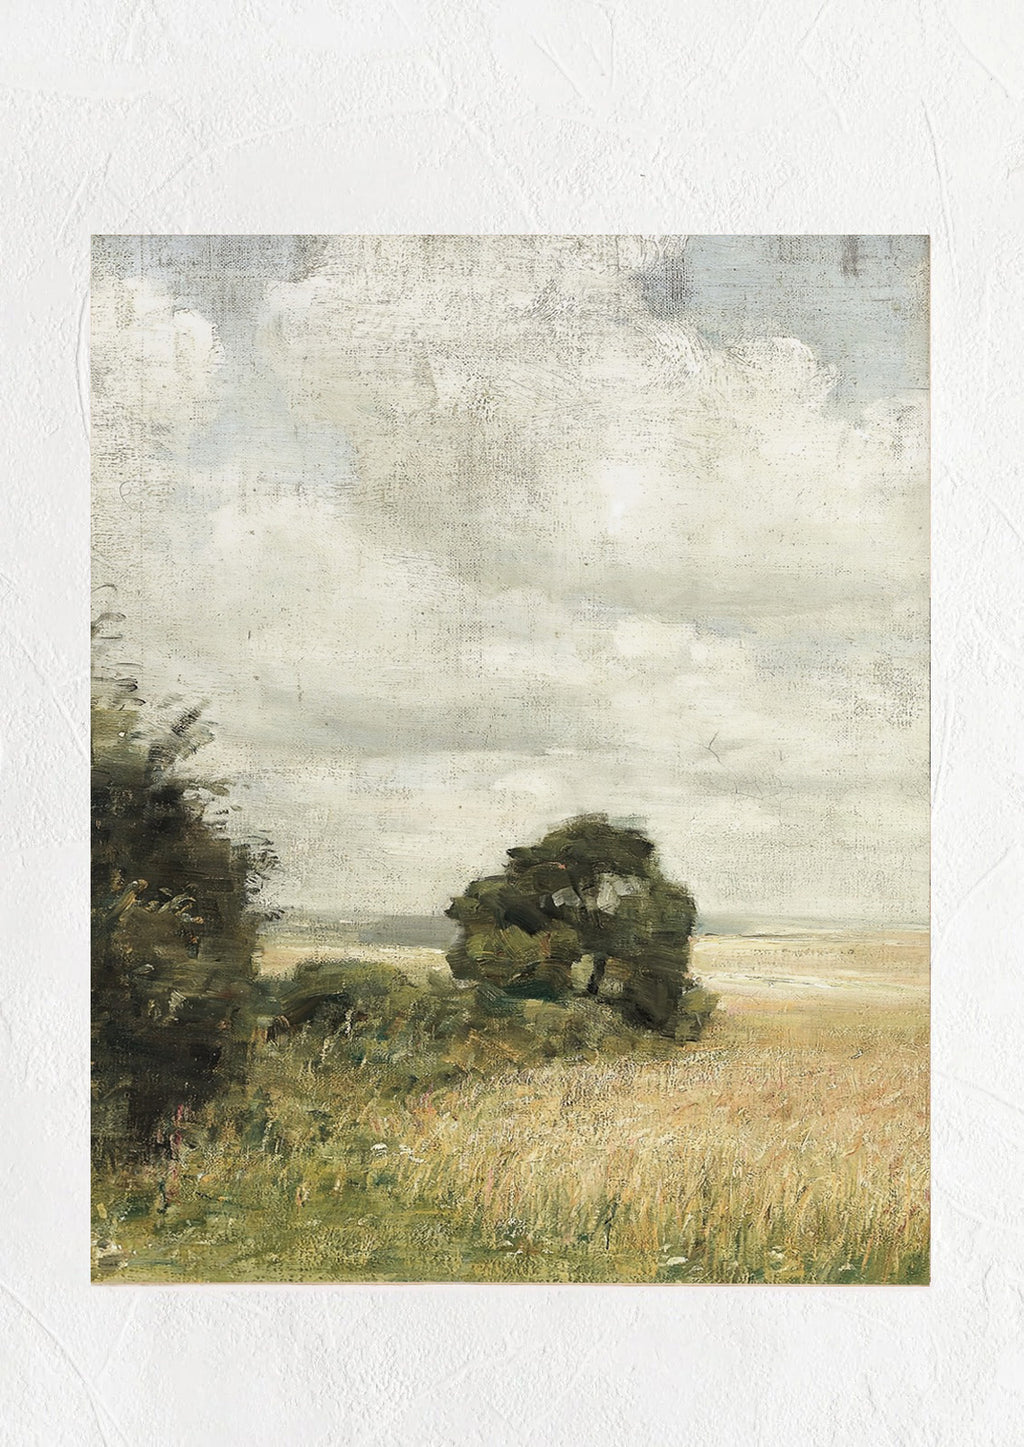 1: An antique inspired landscape art print of tree in wheat field.